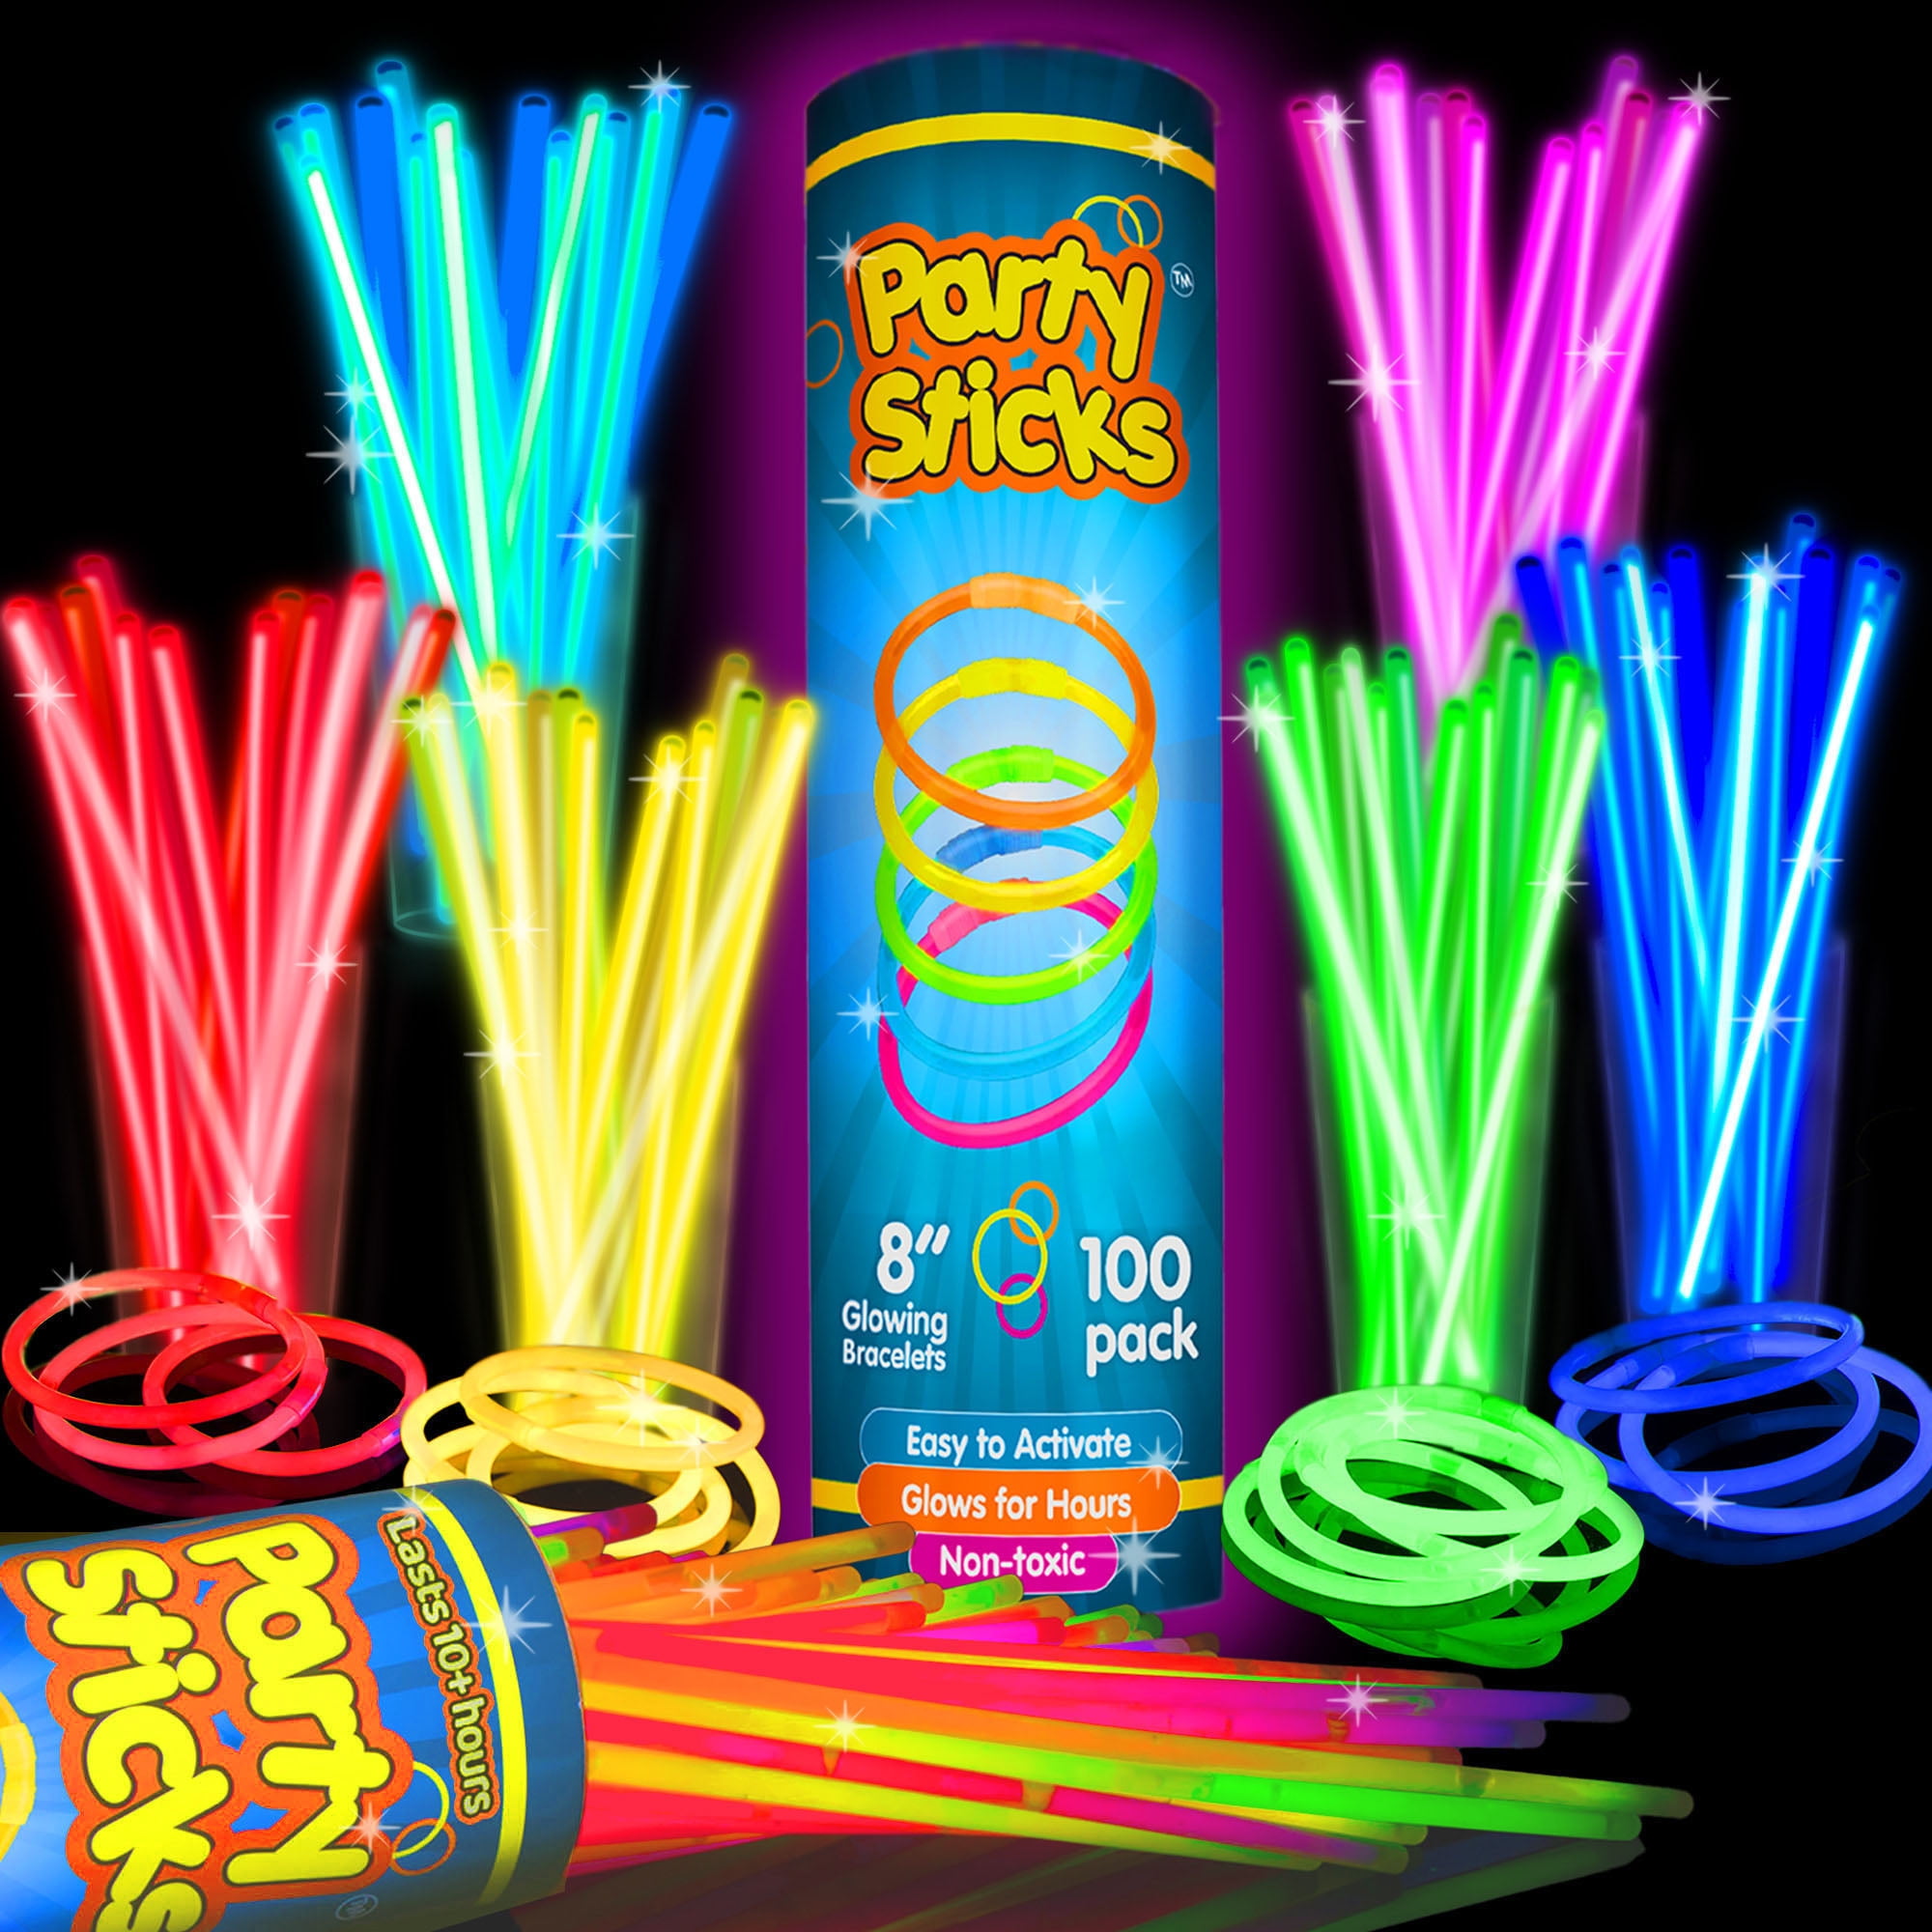 100 Customizable White LED Light Foam Glow Sticks 16 Inch-3 Modes. Great  for Wedding, Quince, Birthday, Rave, Promotional, Sweet 16, Party 